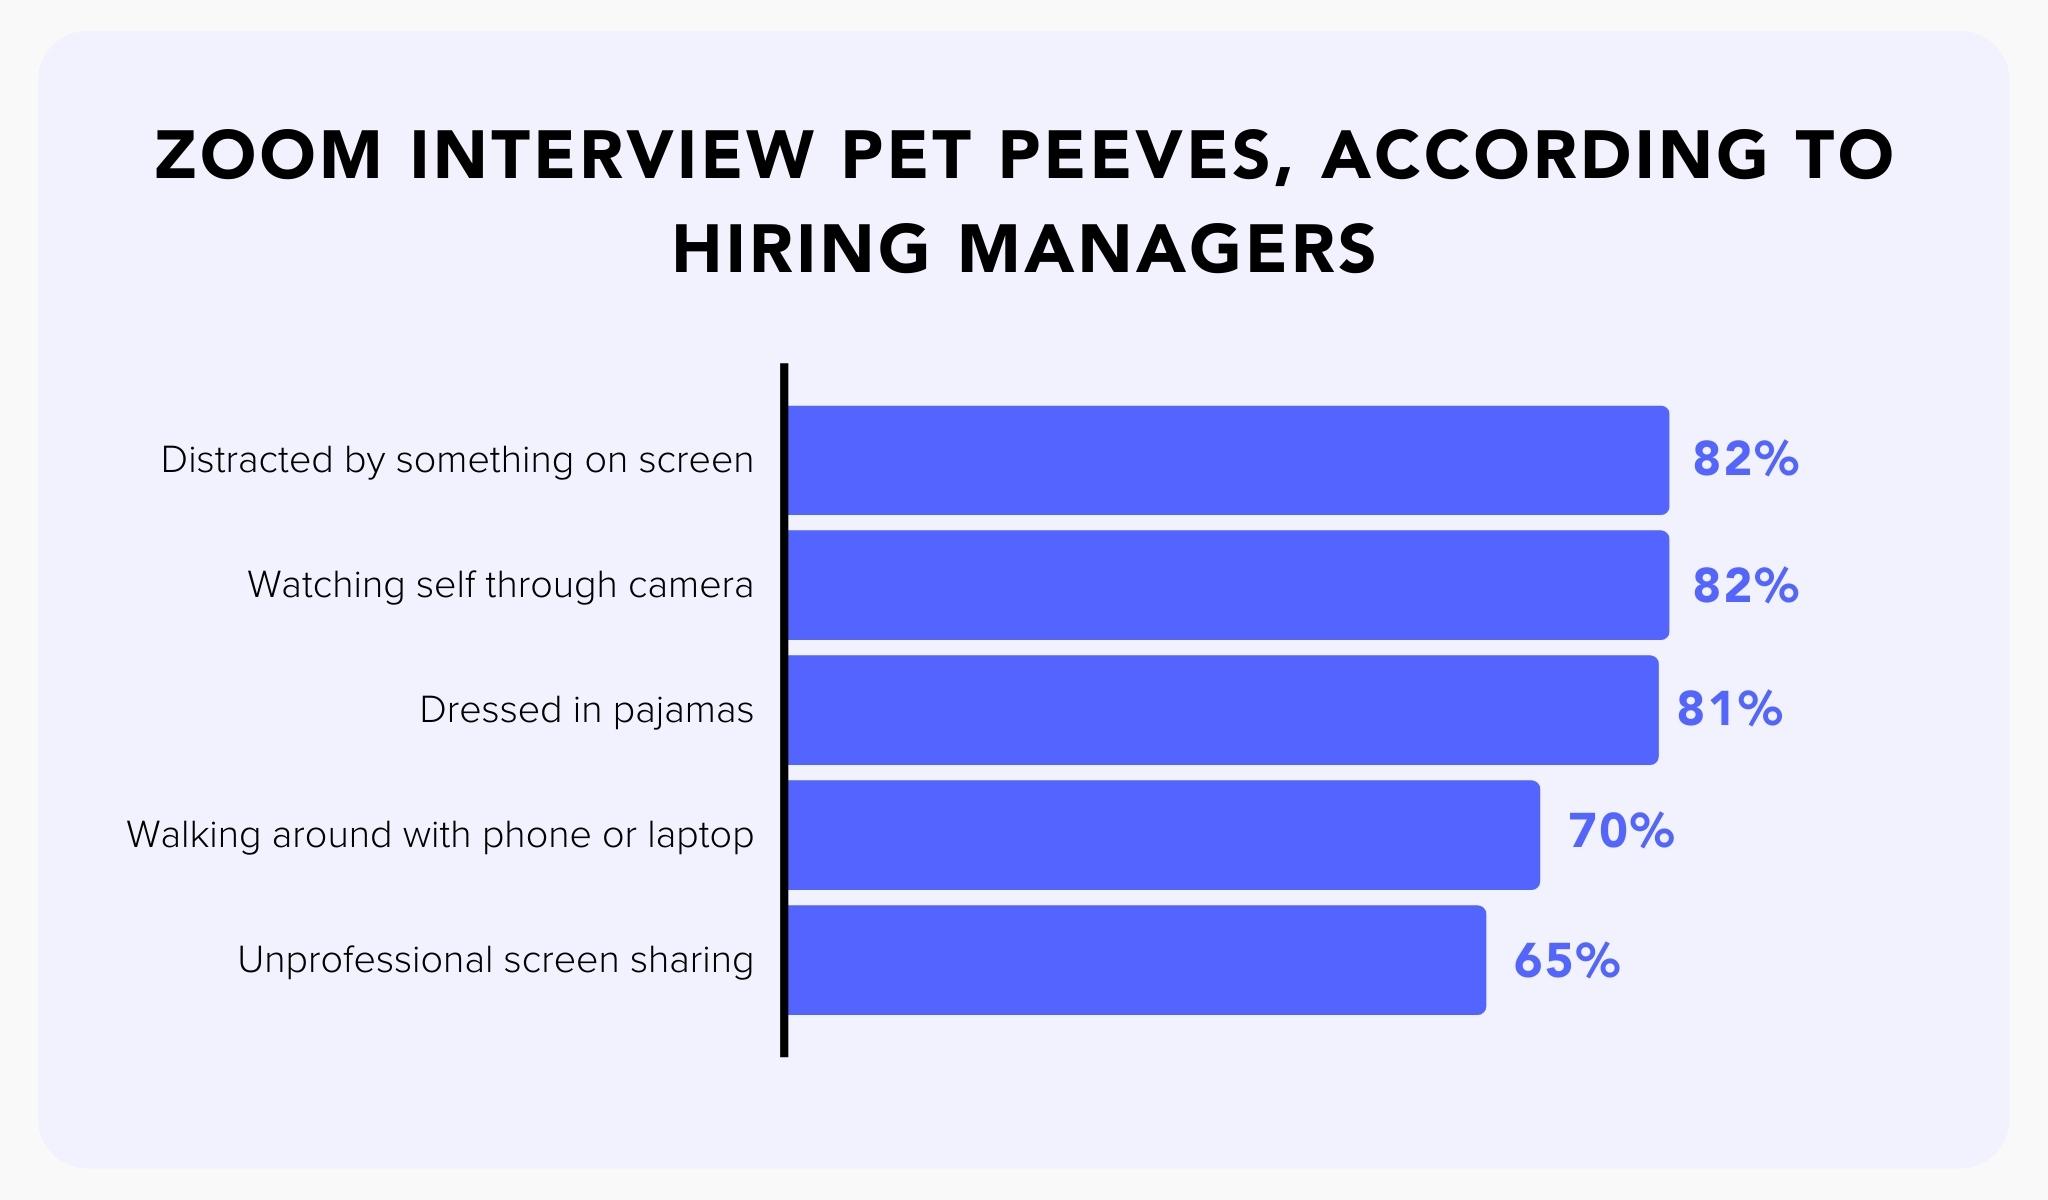 Zoom interview mistakes according to hiring managers
